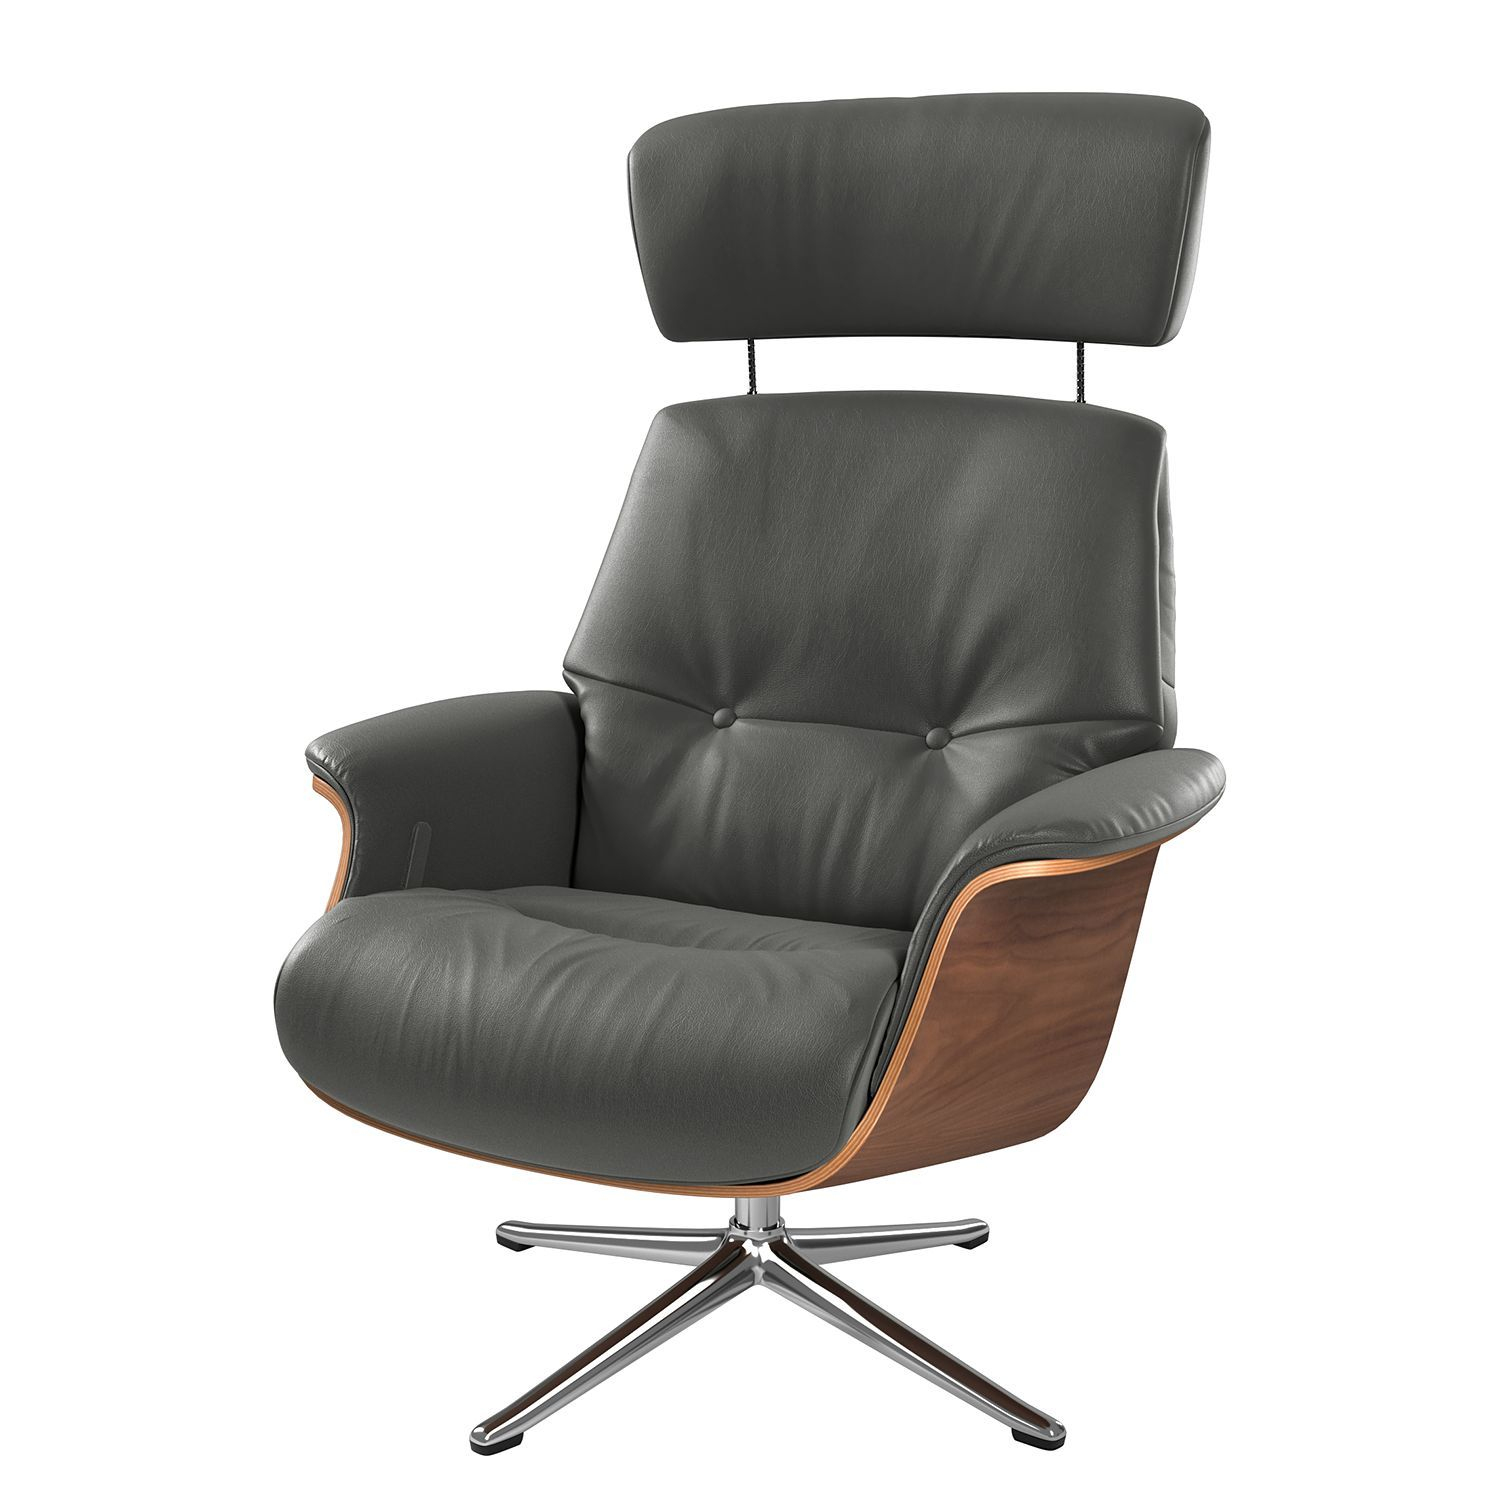 Fauteuil Relax Anderson I In 2020 | Sessel, Fernsehsessel ... encequiconcerne Fauteuil Relax Design Italien